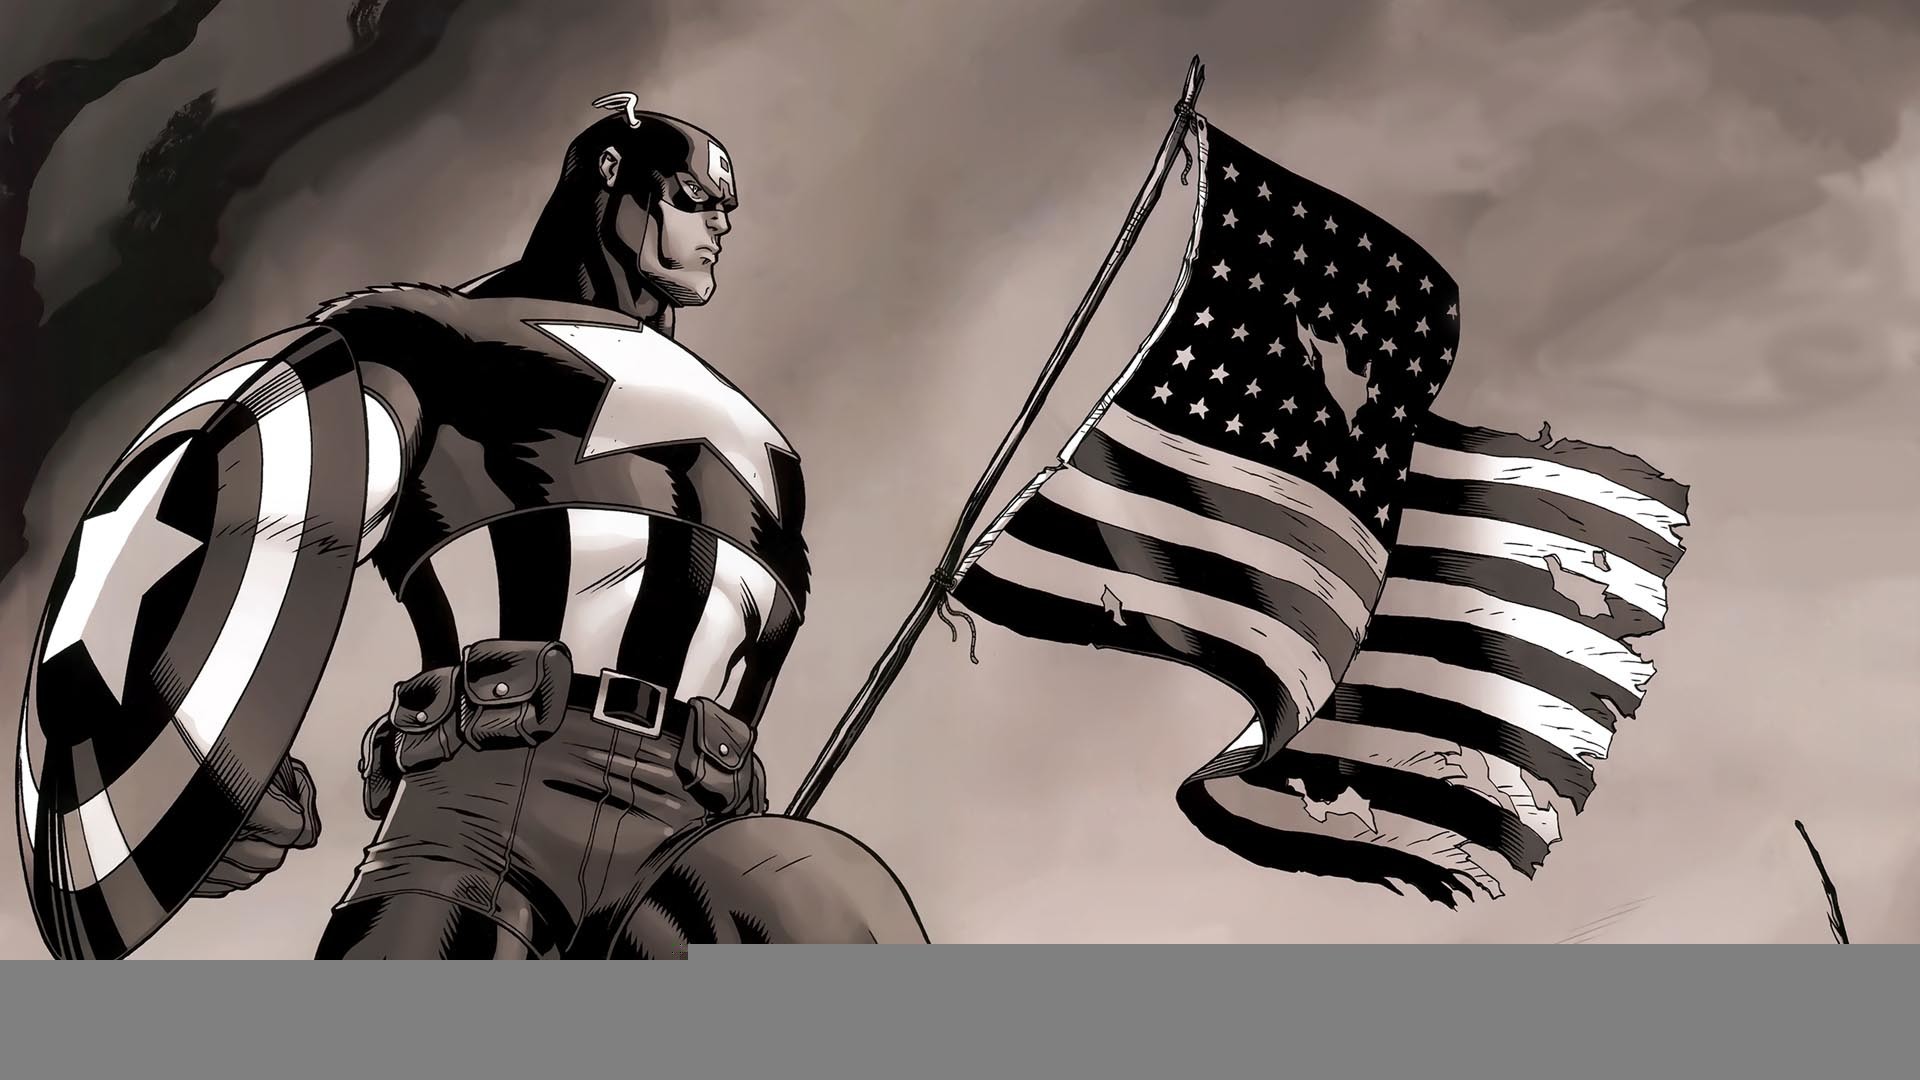 1920x1080 Captain America with American Flag HD Wallpaper in Full HD from the Comics  category.